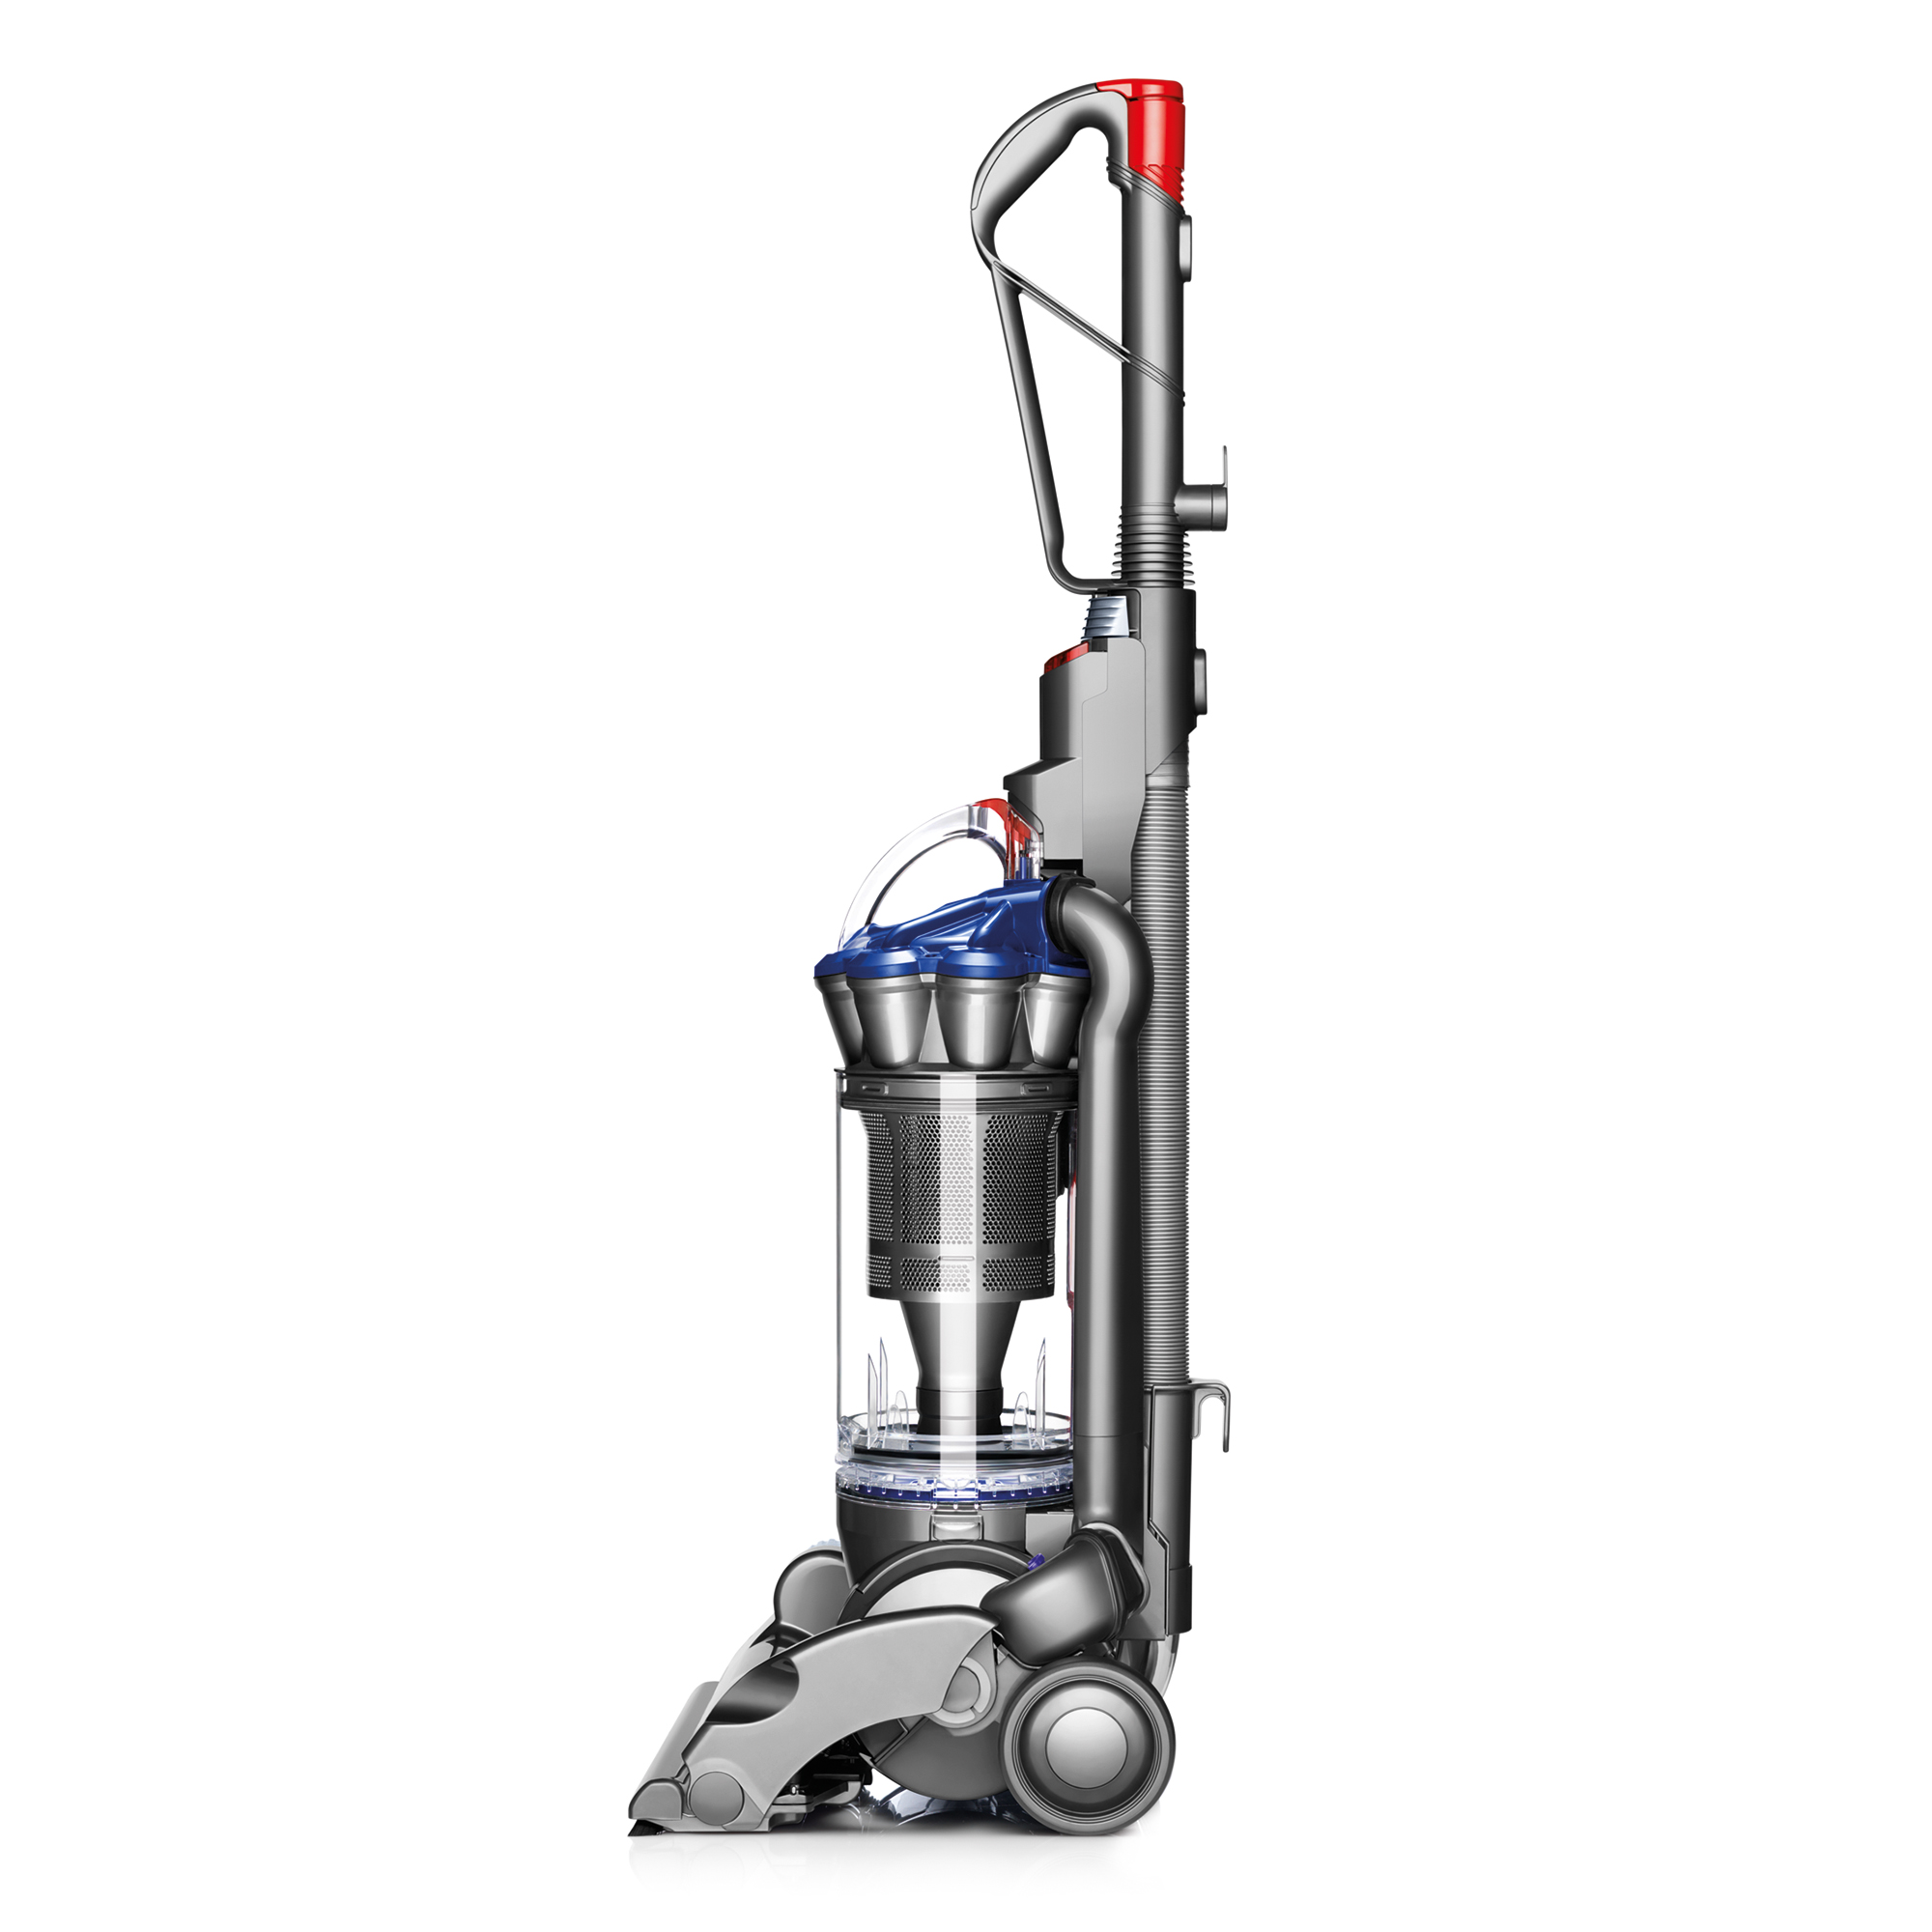 Dyson DC33 Bagless Upright Vacuum, Blue - image 2 of 7